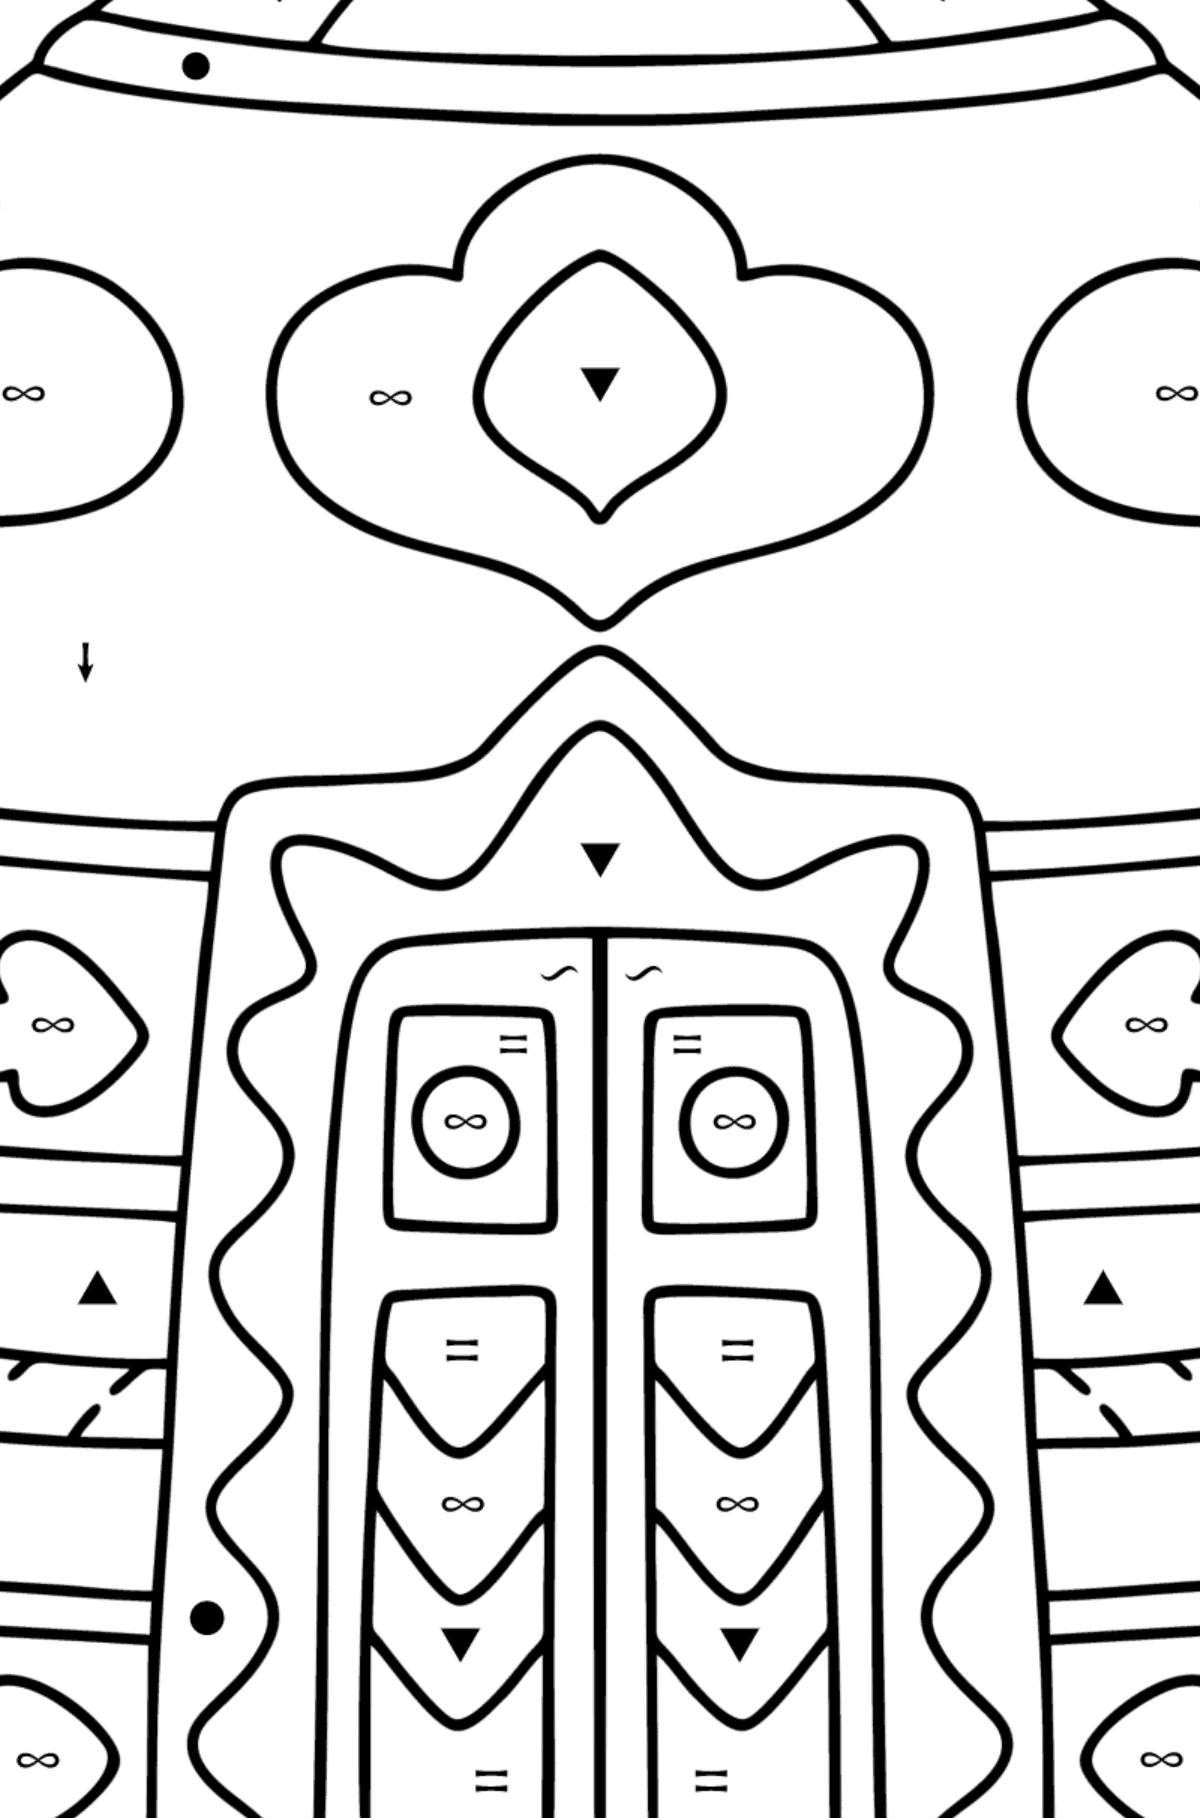 Yurt of nomad coloring page - Coloring by Symbols for Kids